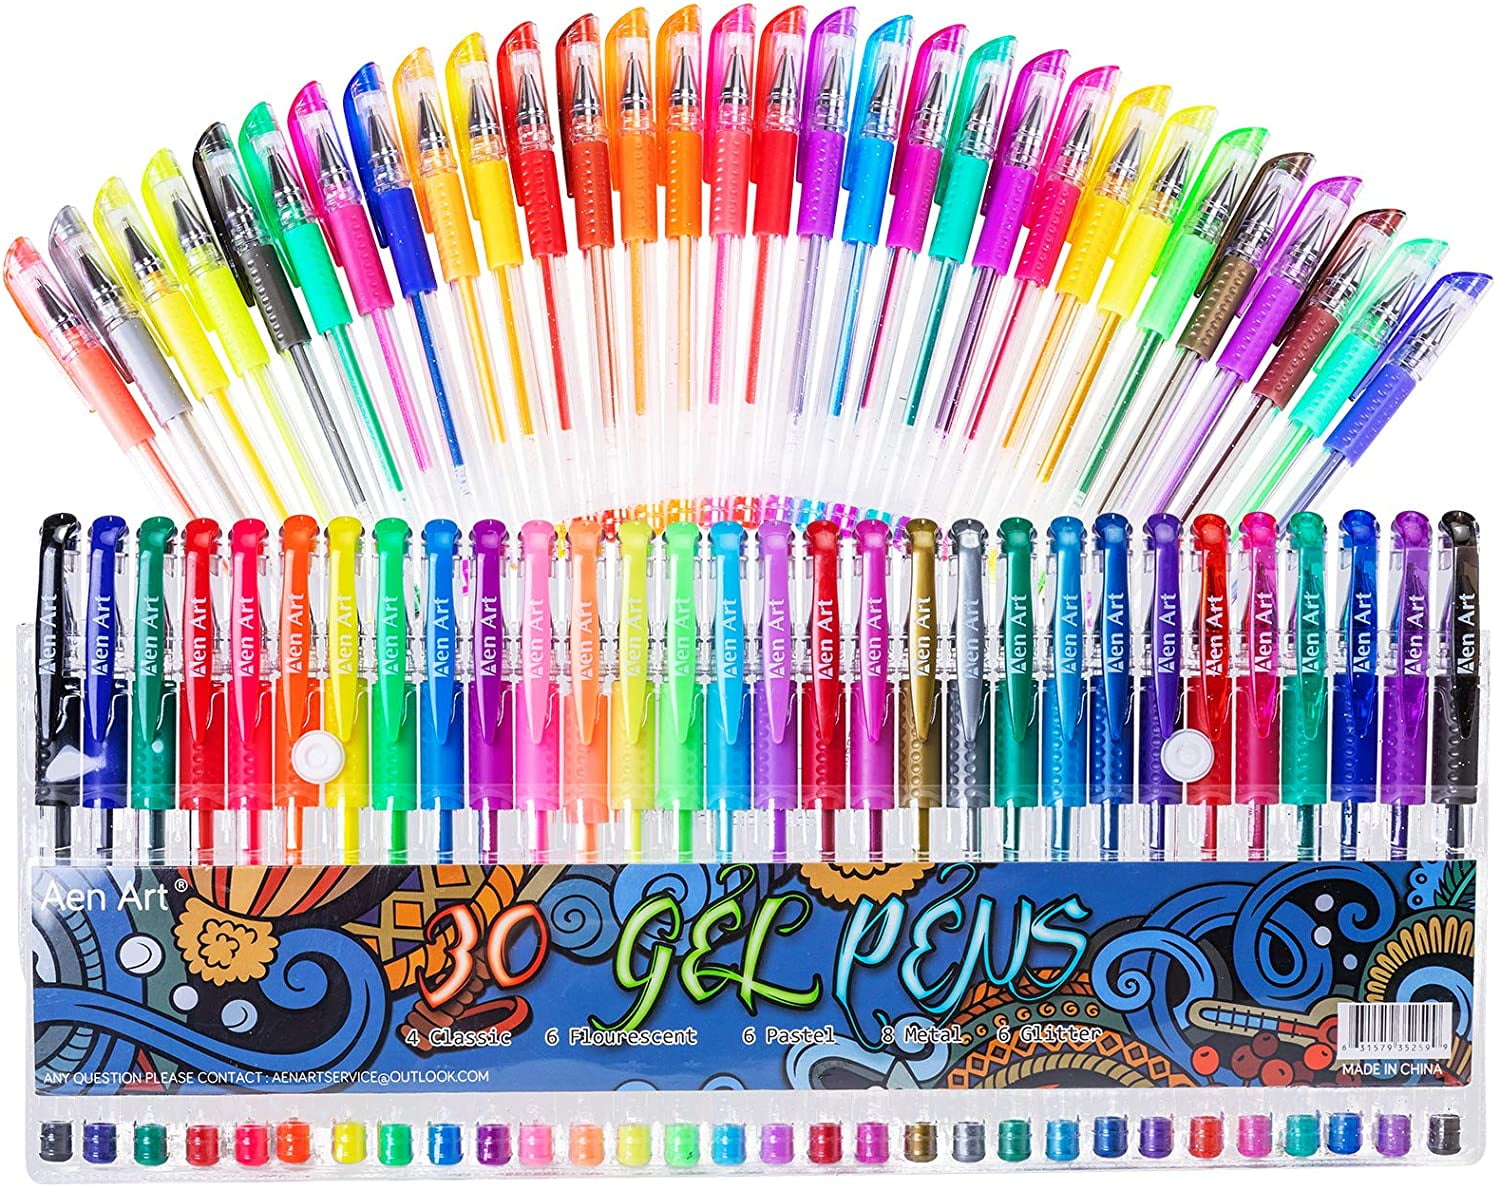 FUN LAVIE Gel Pens 60 Colors Set Art Drawing Marker Pen for Adult Coloring  Book Writing Painting